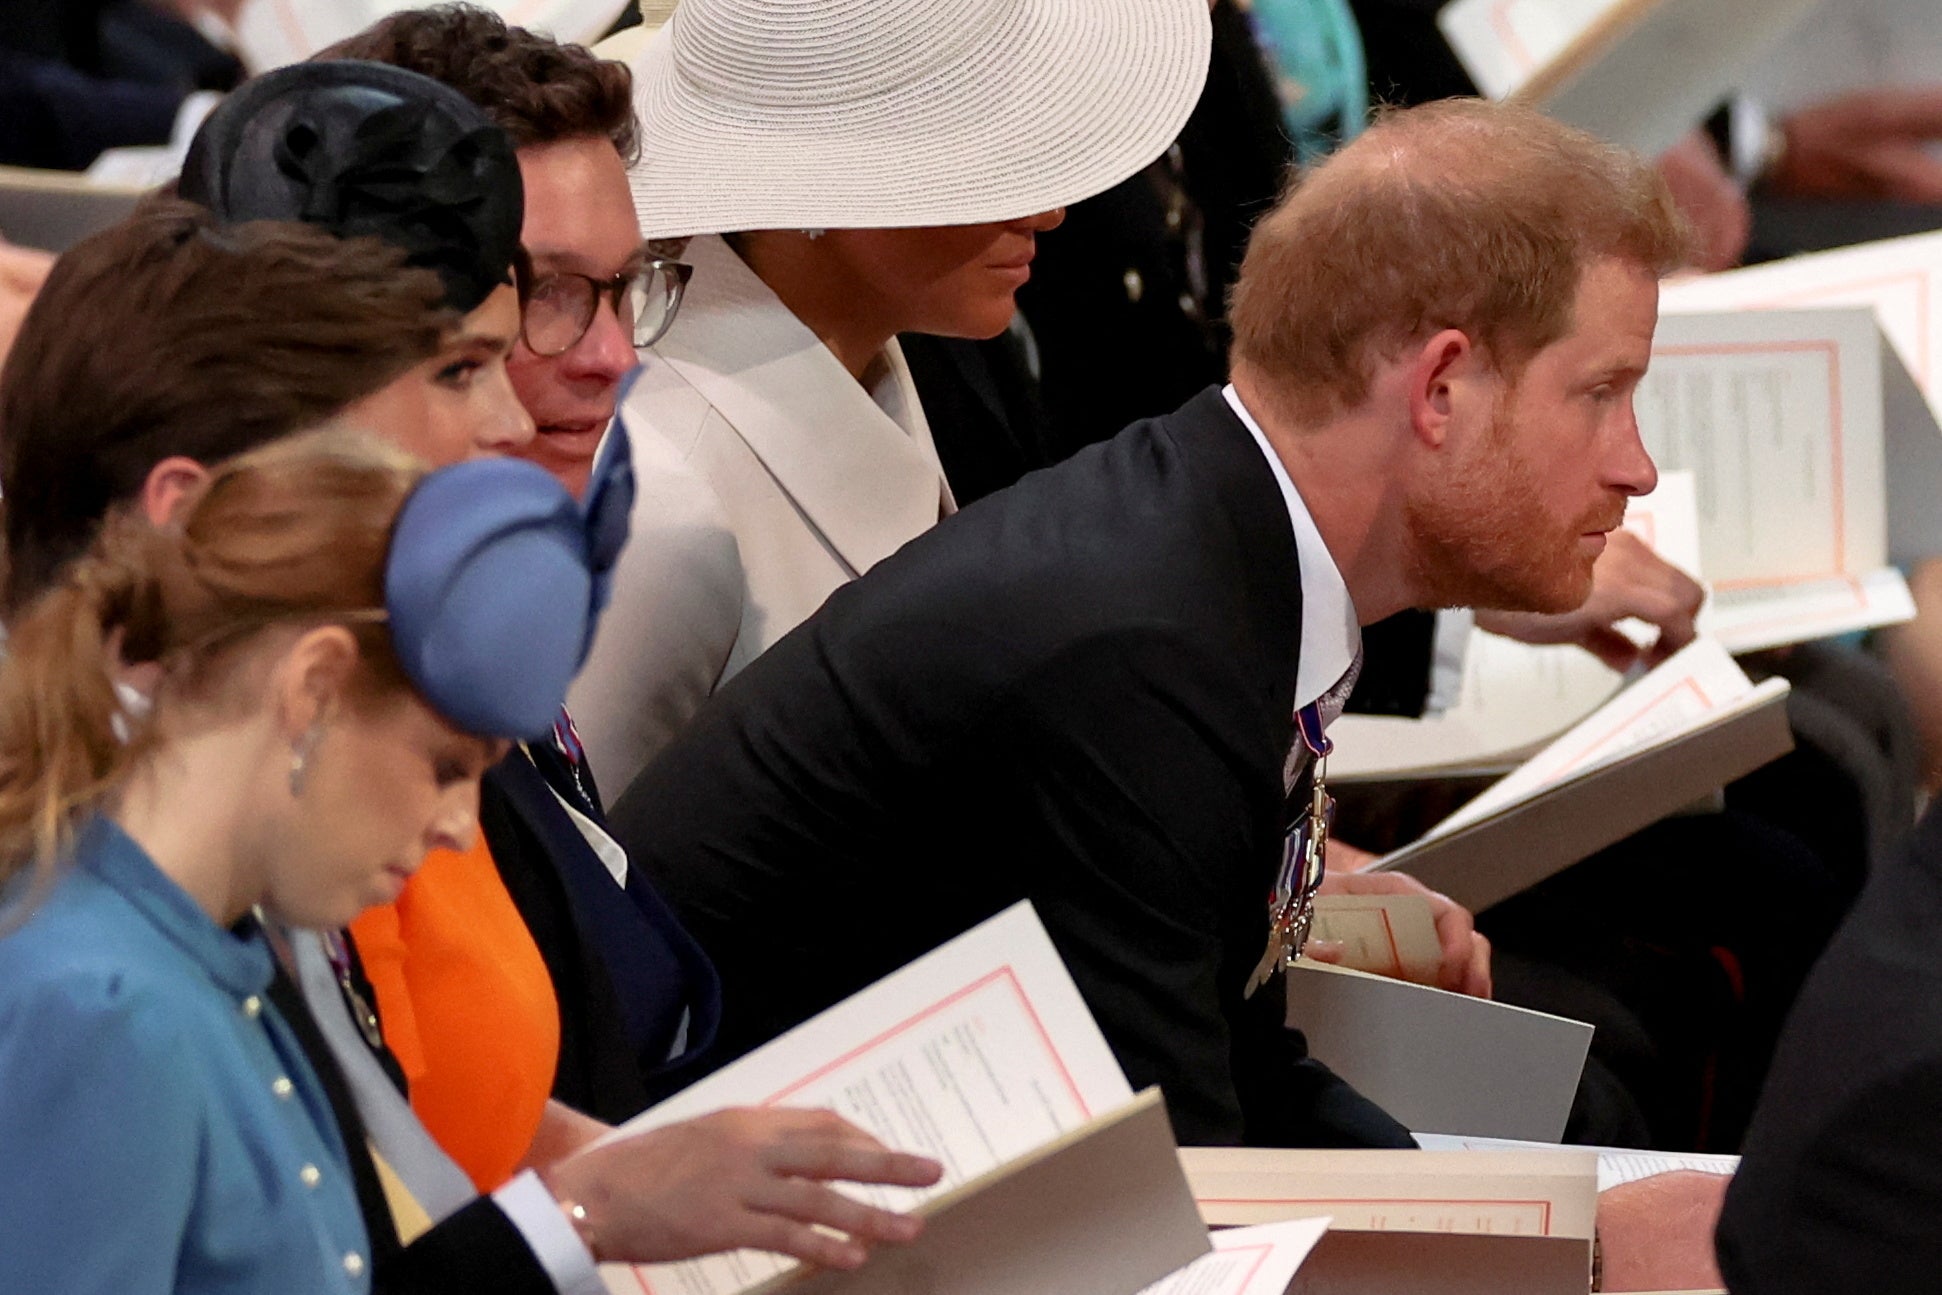 The Duke of Sussex (centre) and Princess Beatrice attend the National Service of Thanksgiving at St Paul’s Cathedral